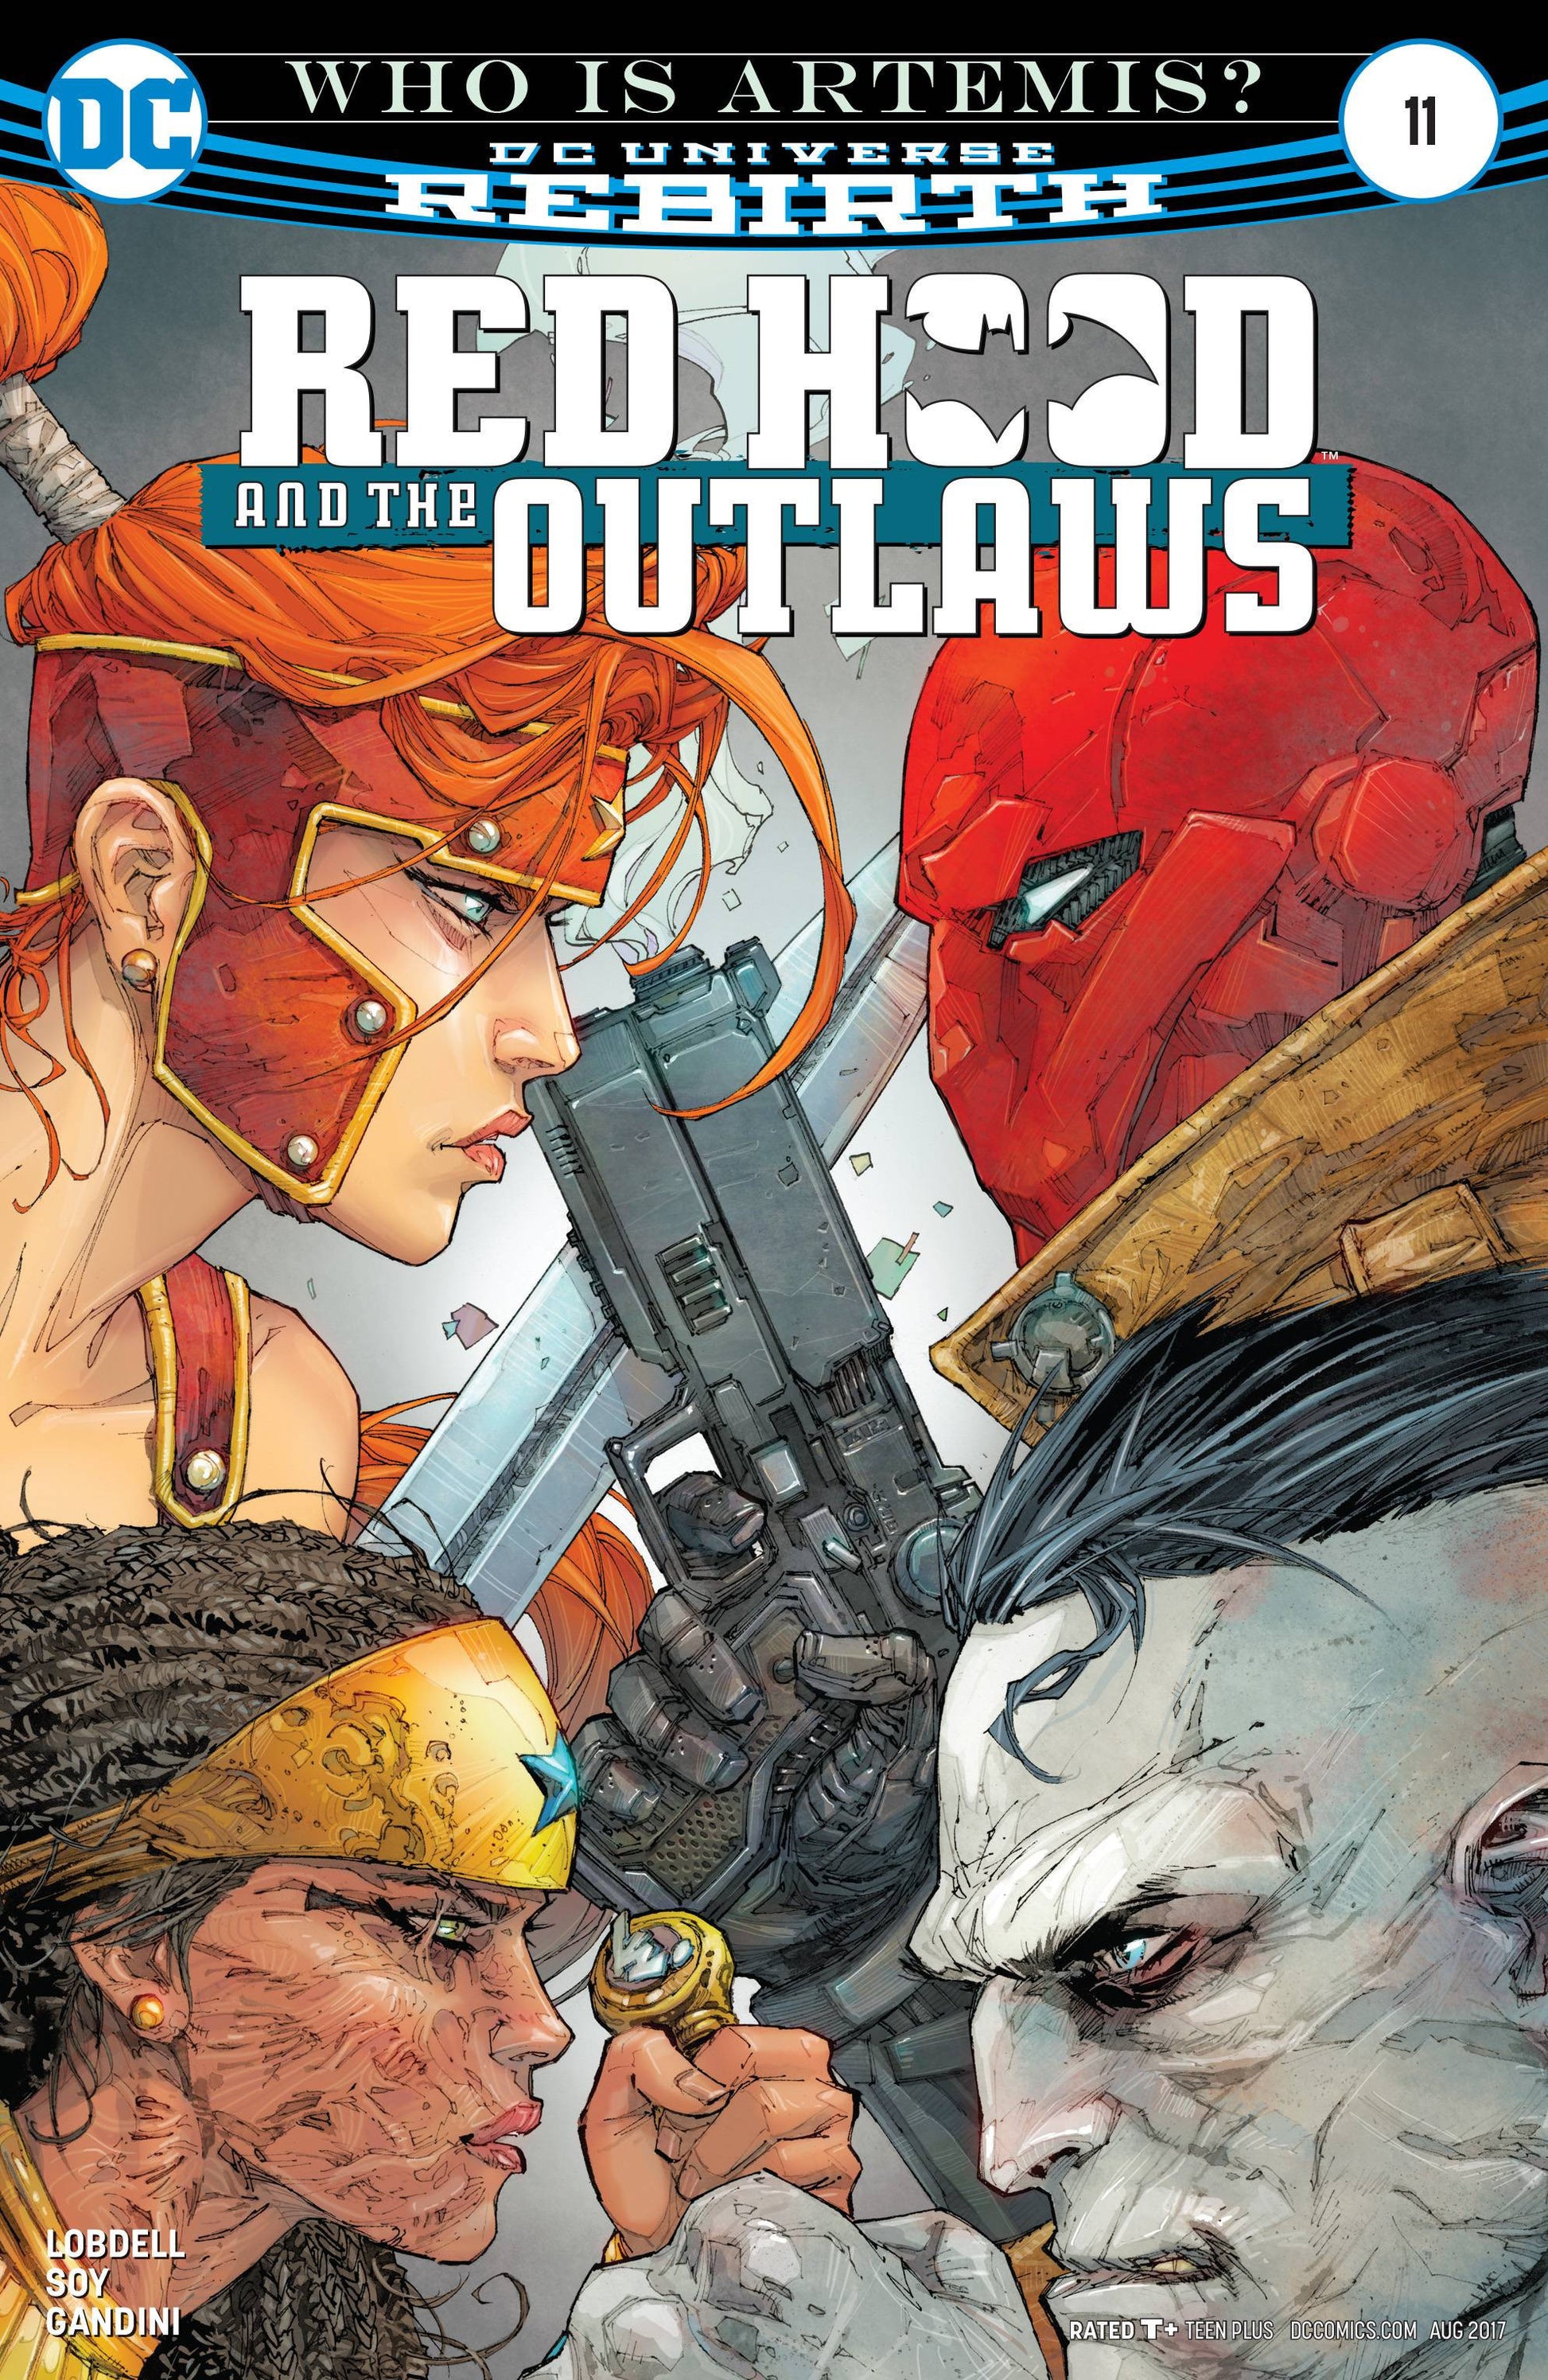 RED HOOD AND THE OUTLAWS #11 COVER